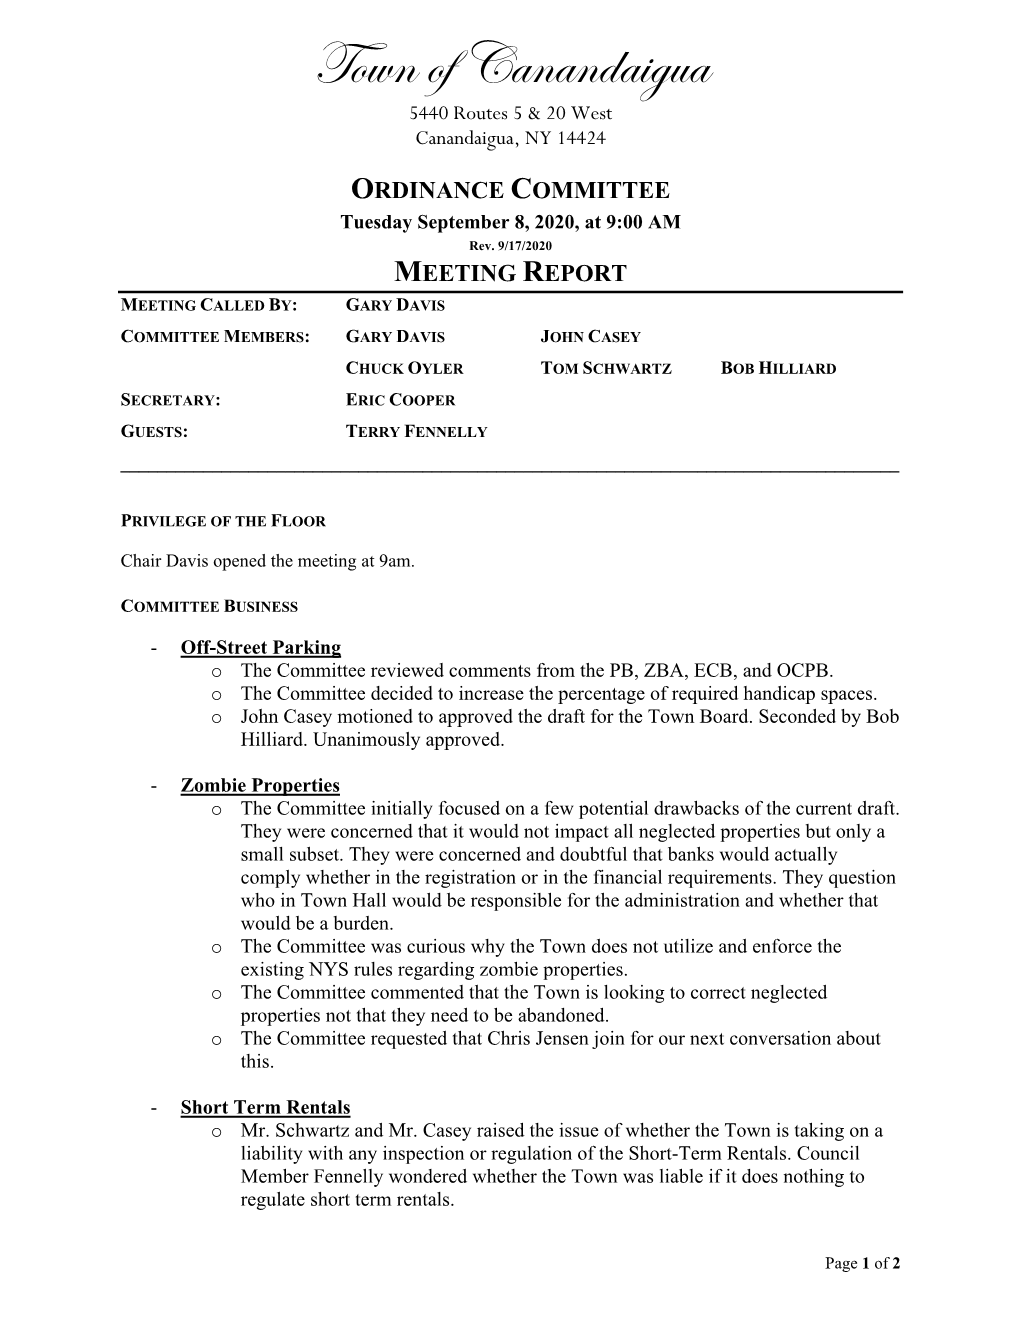 ORDINANCE COMMITTEE Tuesday September 8, 2020, at 9:00 AM Rev